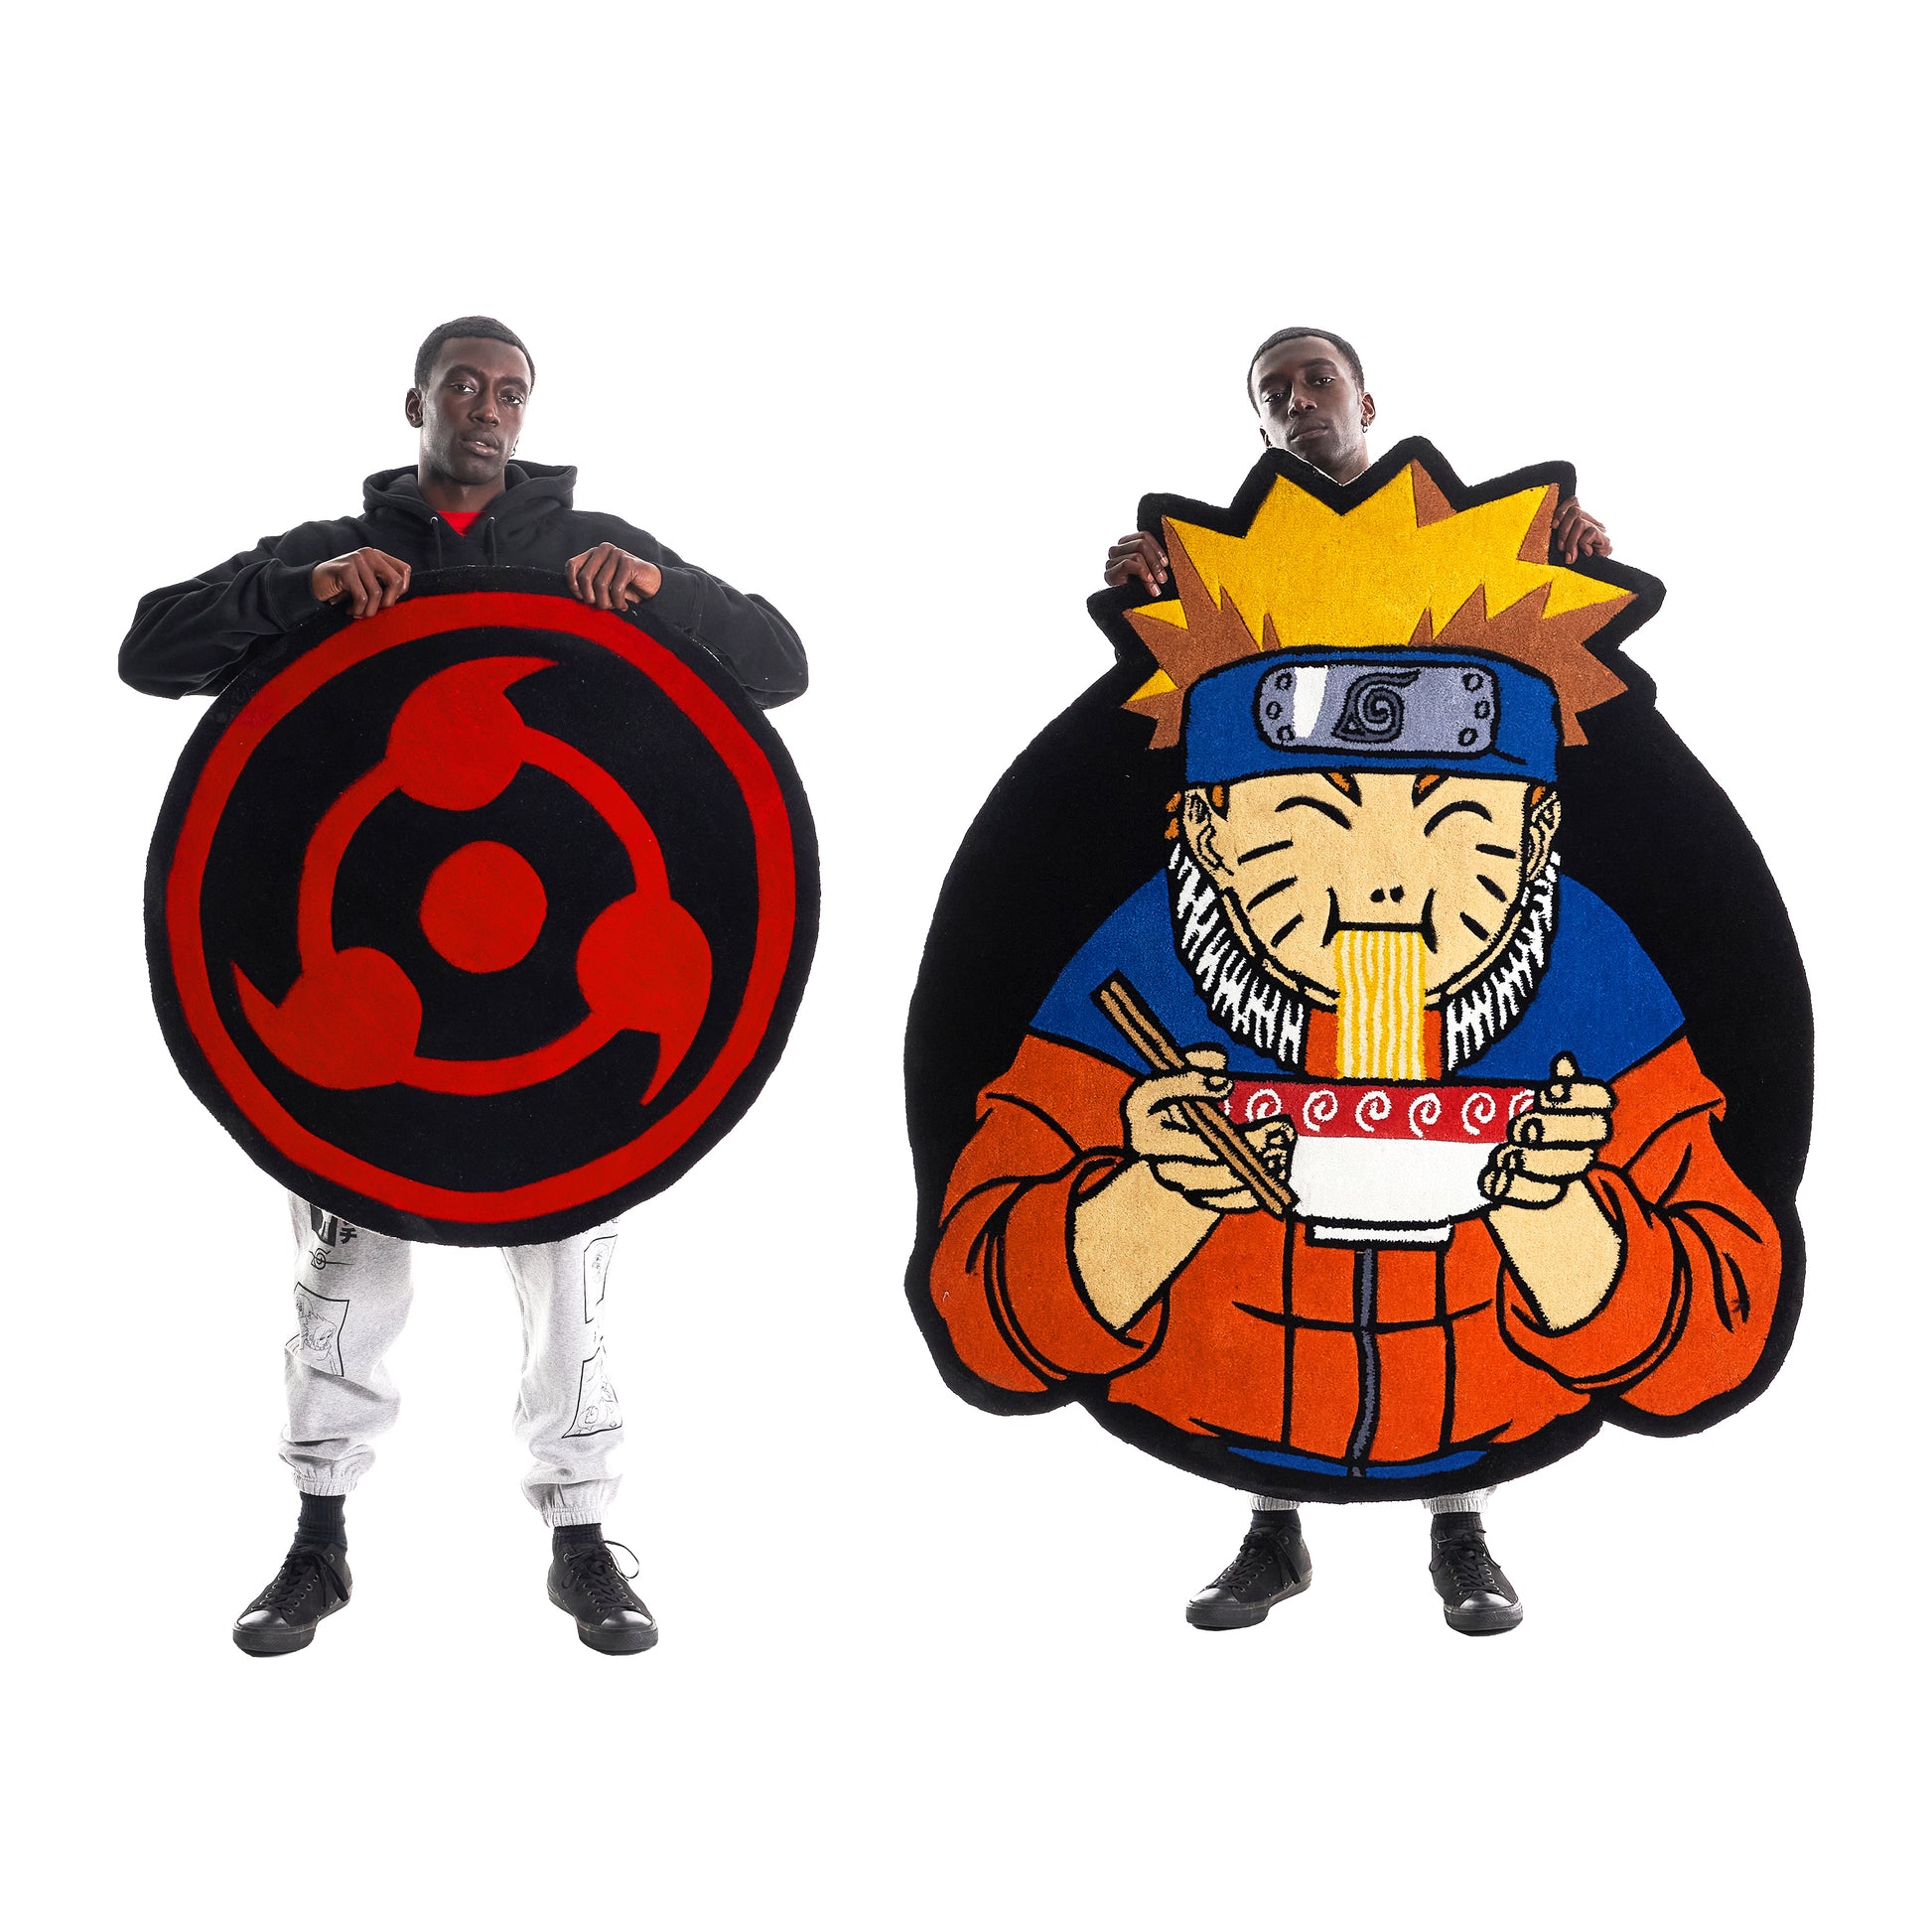 NARUTO CIRCLE CHARACTER STICKER PACK – Hypland